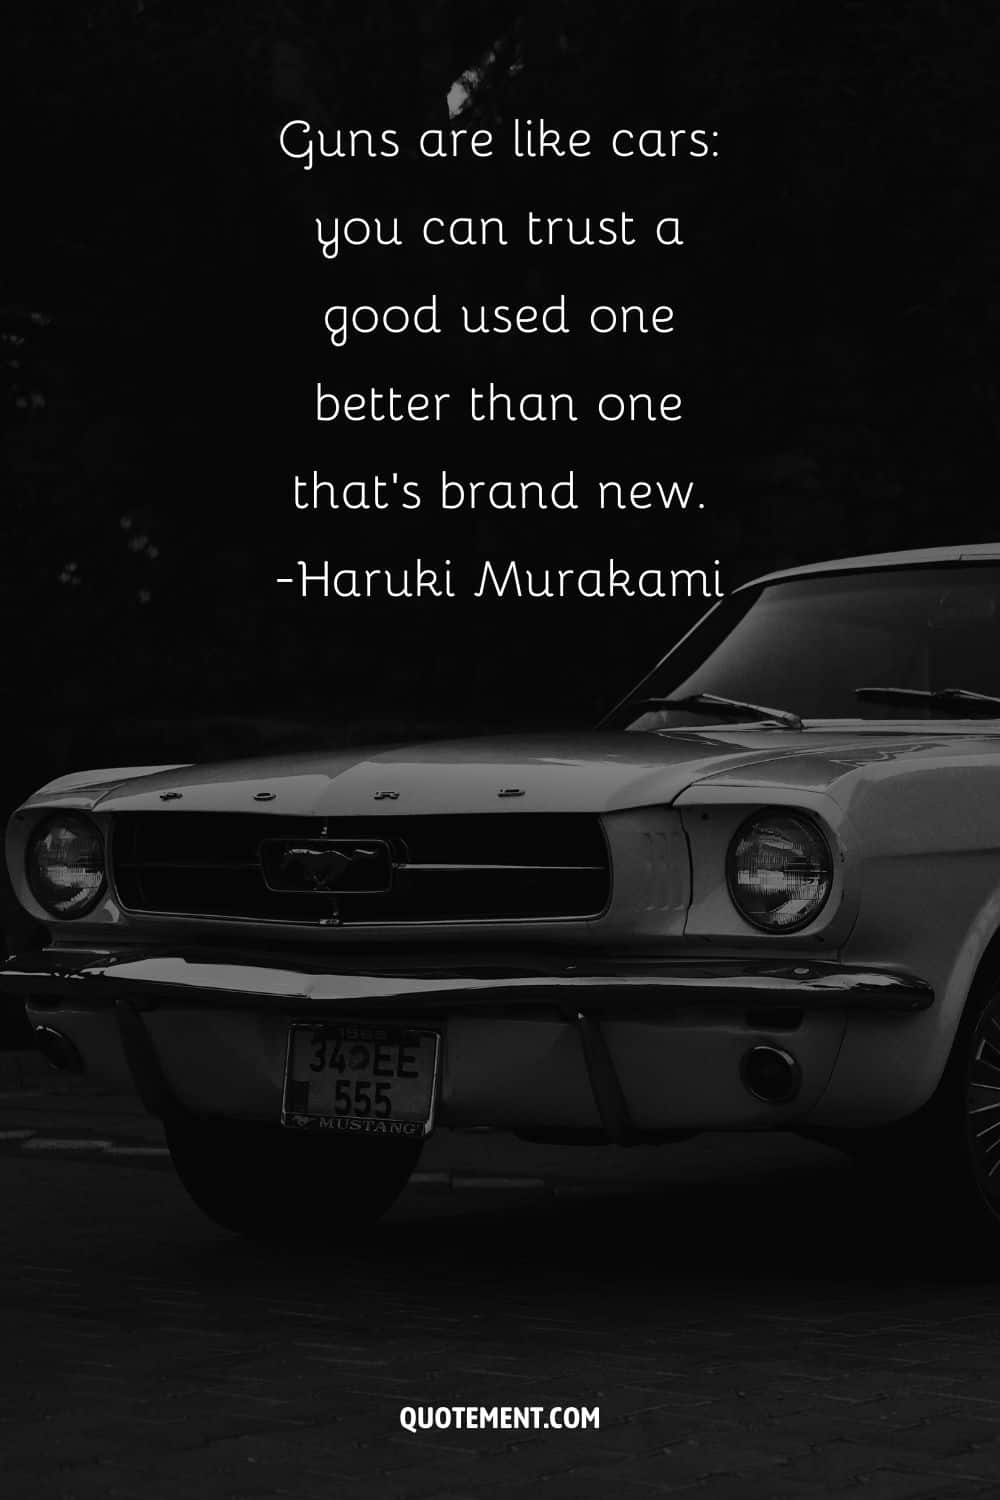 “Guns are like cars you can trust a good used one better than one that's brand new.” ― Haruki Murakami, 1Q84